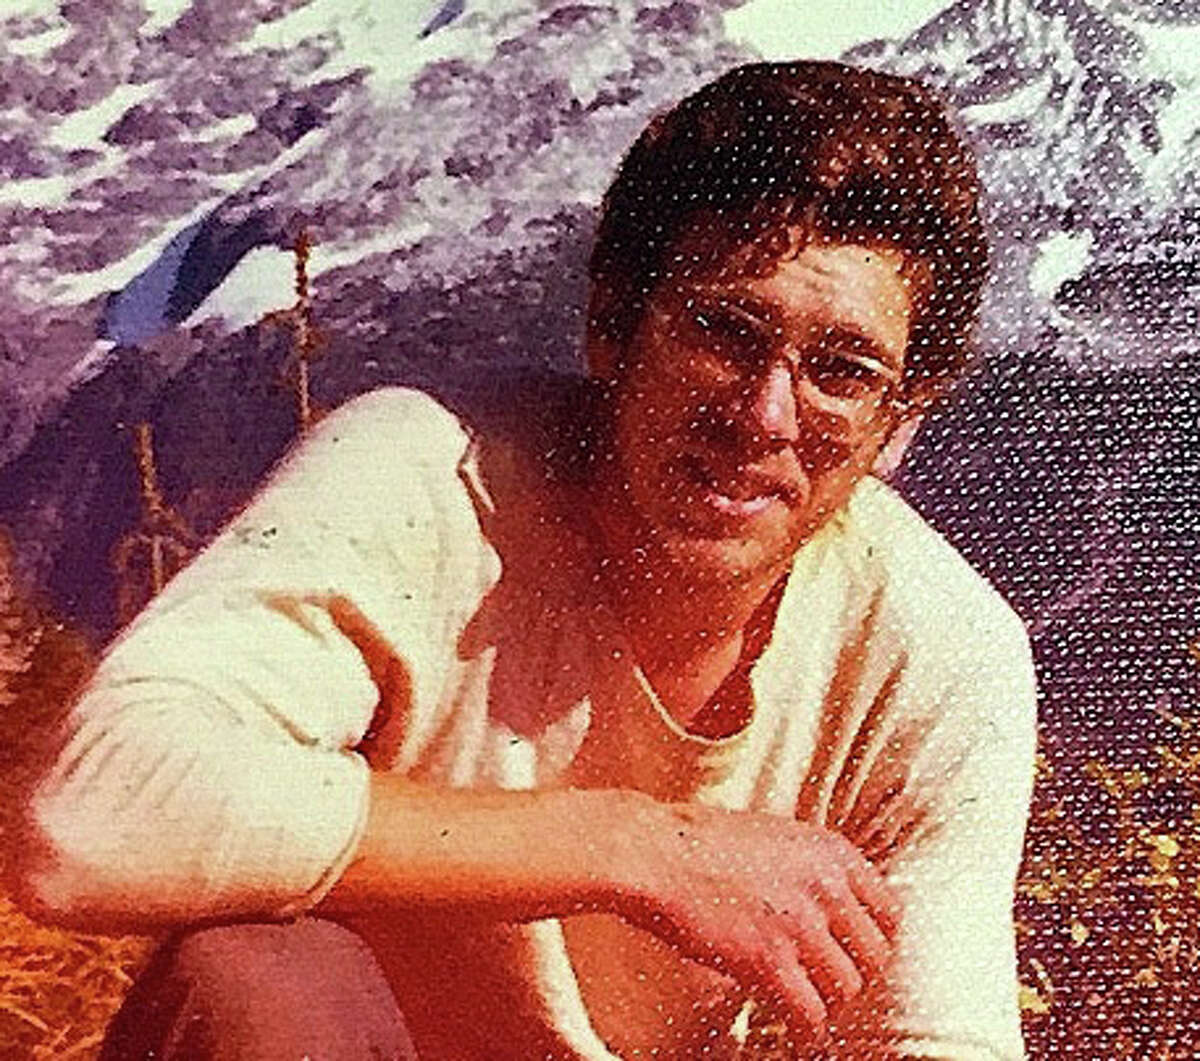 Local jeweler Terry Betteridge, shown here after graduating from Greenwich High School, spent his late teens visiting and working in wilderness areas.